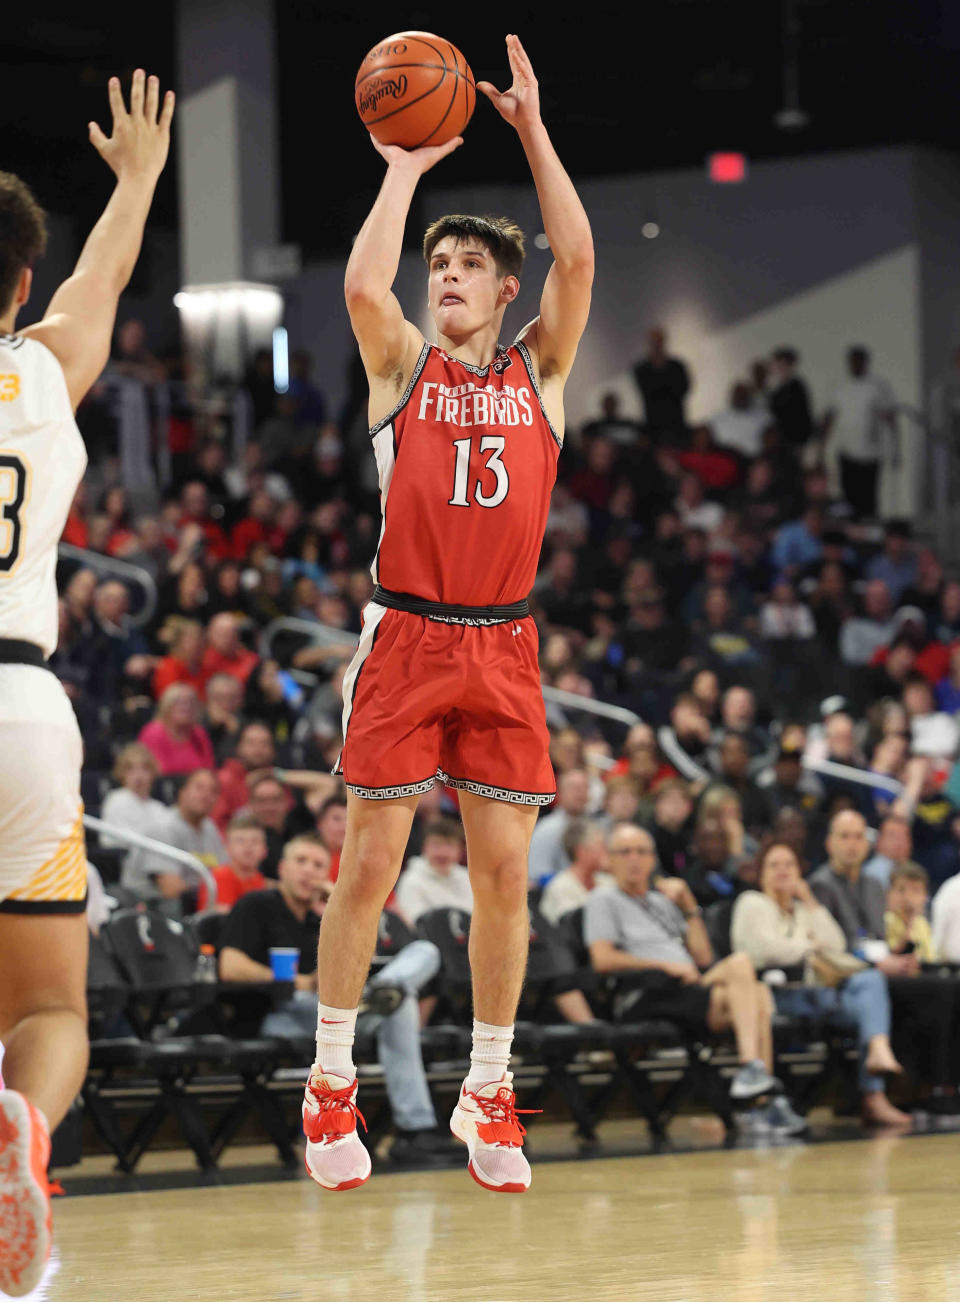 Lakota West guard Nathan Dudukovich (13) shoots the ball during their district final against Centerville, Sunday, March 6. He'll lead the Firebirds in 2022-23.